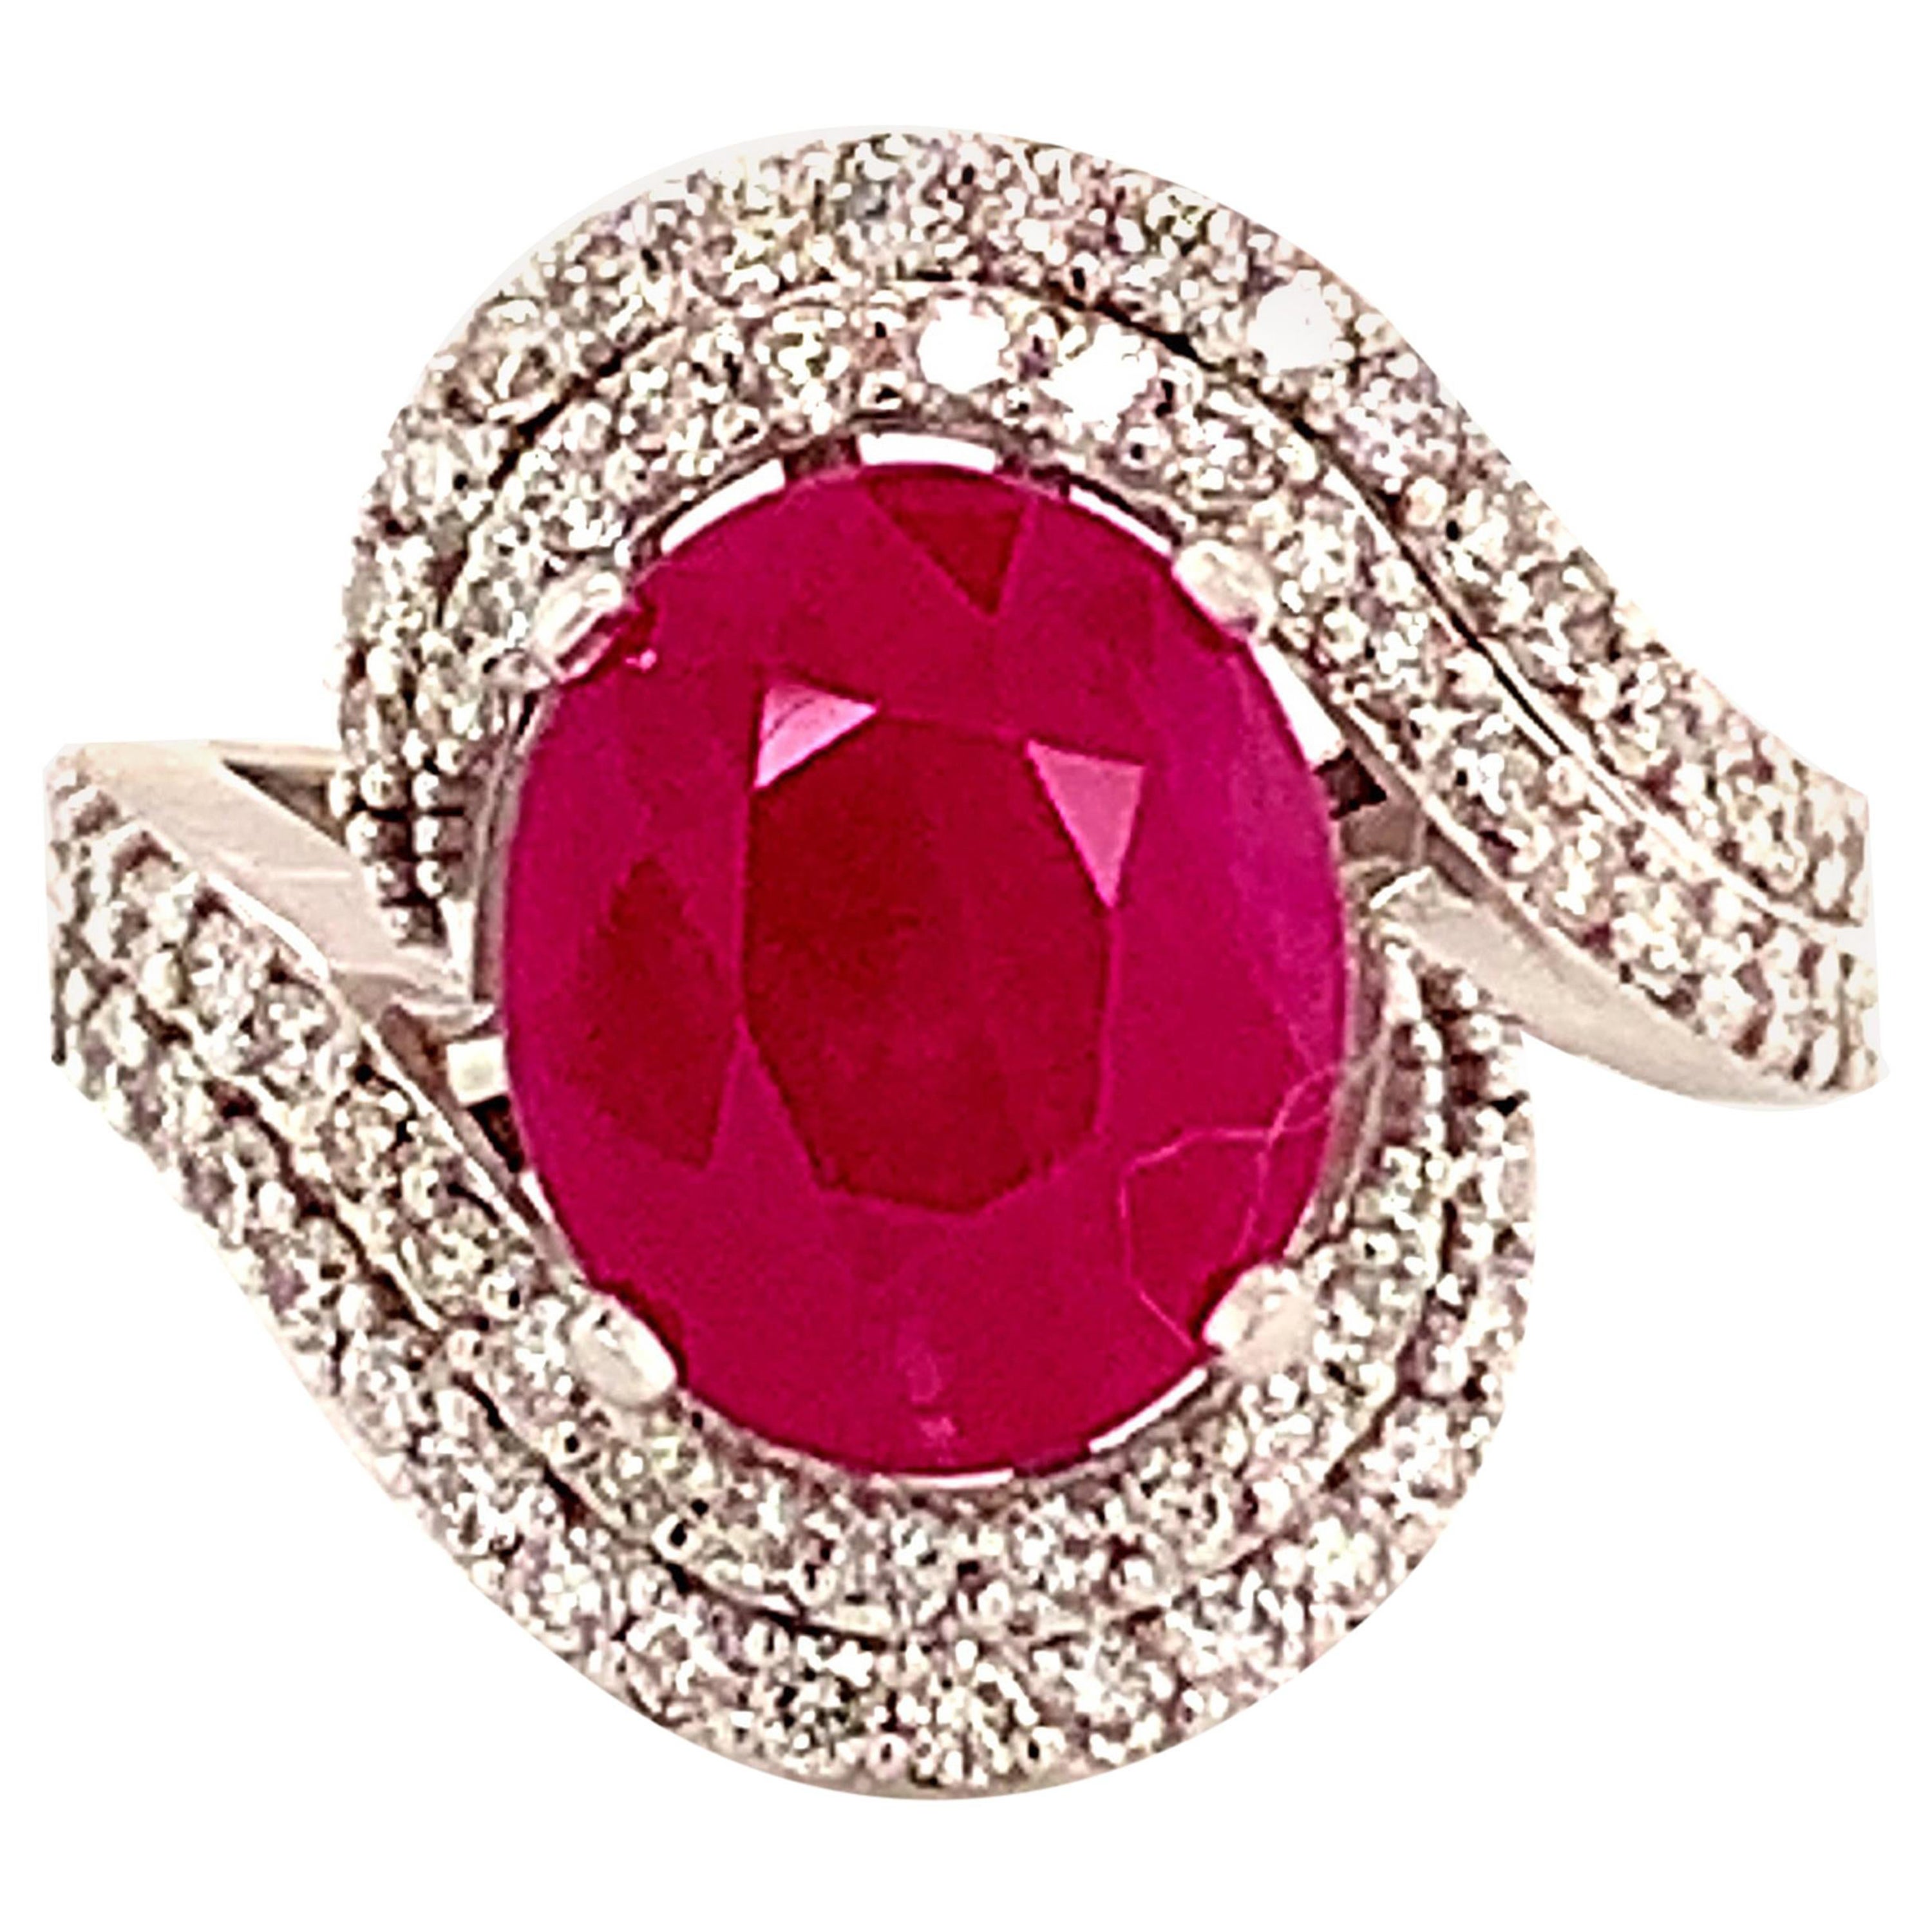 Natural Ruby Diamond Ring 14k Gold 6.32 TCW GIA Certified For Sale